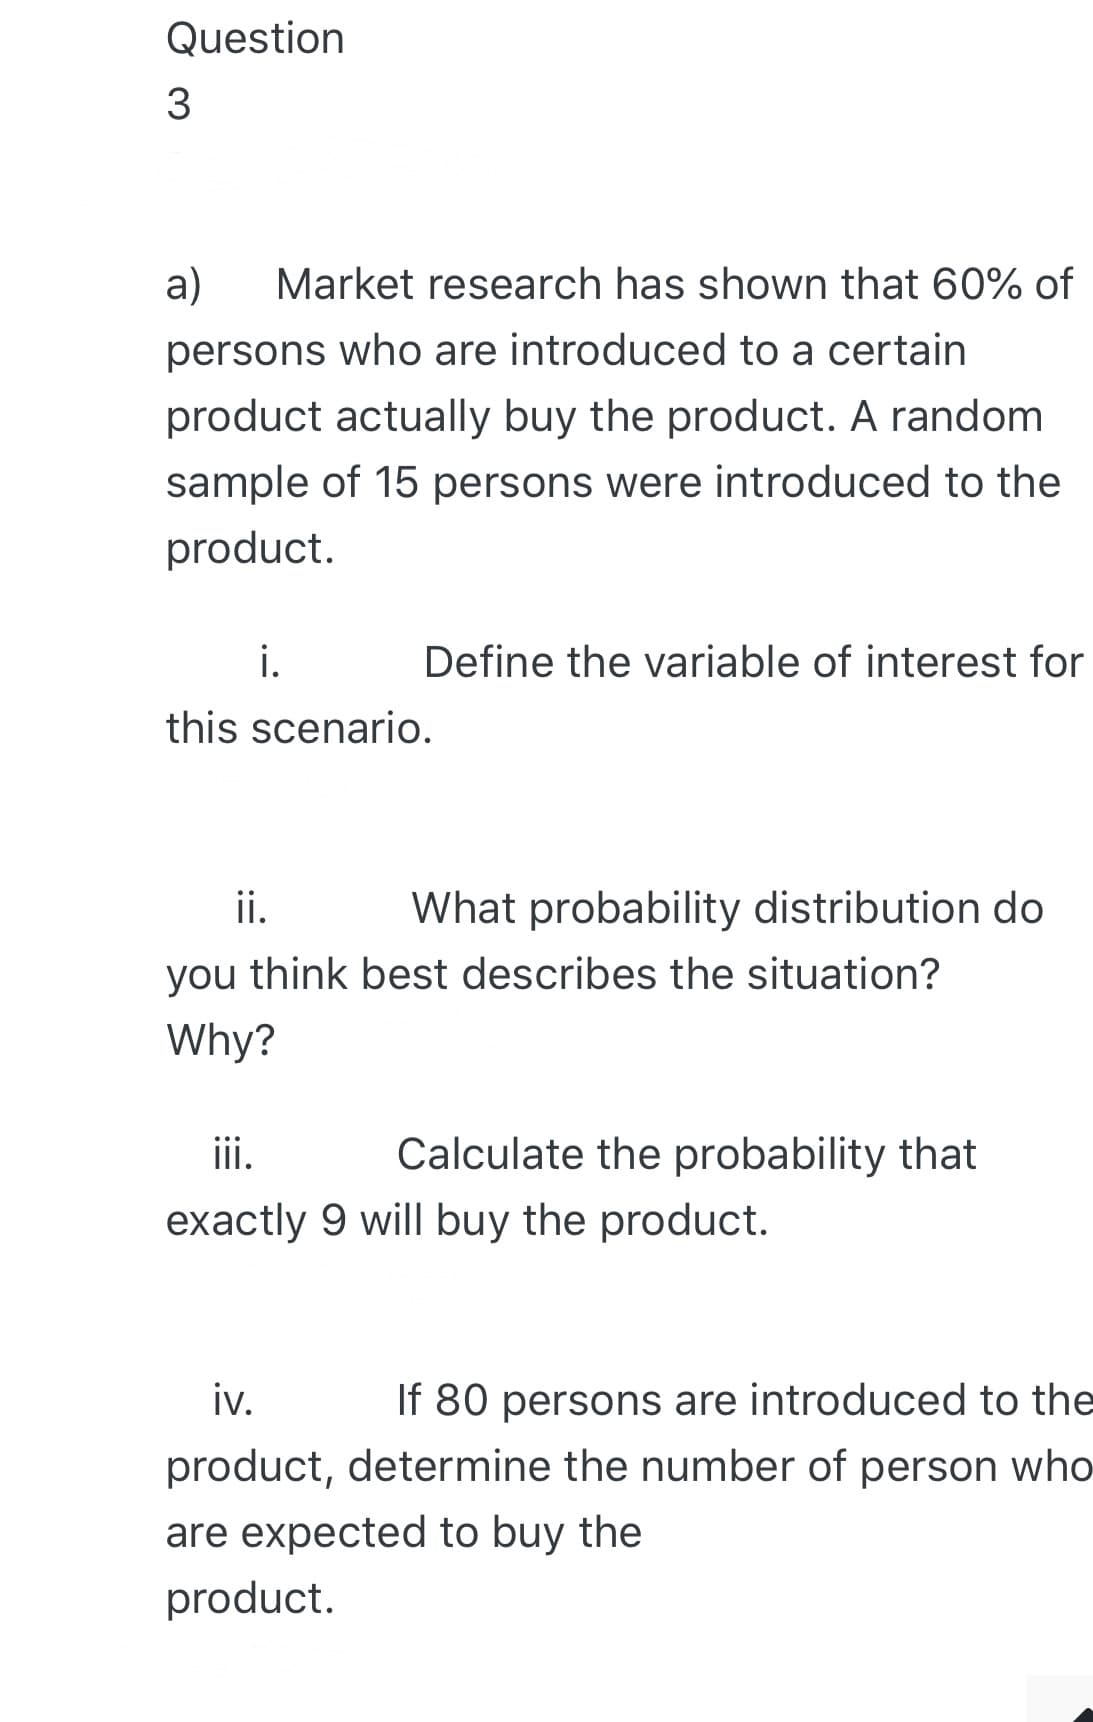 Question
3
a)
Market research has shown that 60% of
persons who are introduced to a certain
product actually buy the product. A random
sample of 15 persons were introduced to the
product.
i.
Define the variable of interest for
this scenario.
ii.
What probability distribution do
you think best describes the situation?
Why?
iii.
Calculate the probability that
exactly 9 will buy the product.
iv.
If 80 persons are introduced to the
product, determine the number of person who
are expected to buy the
product.
